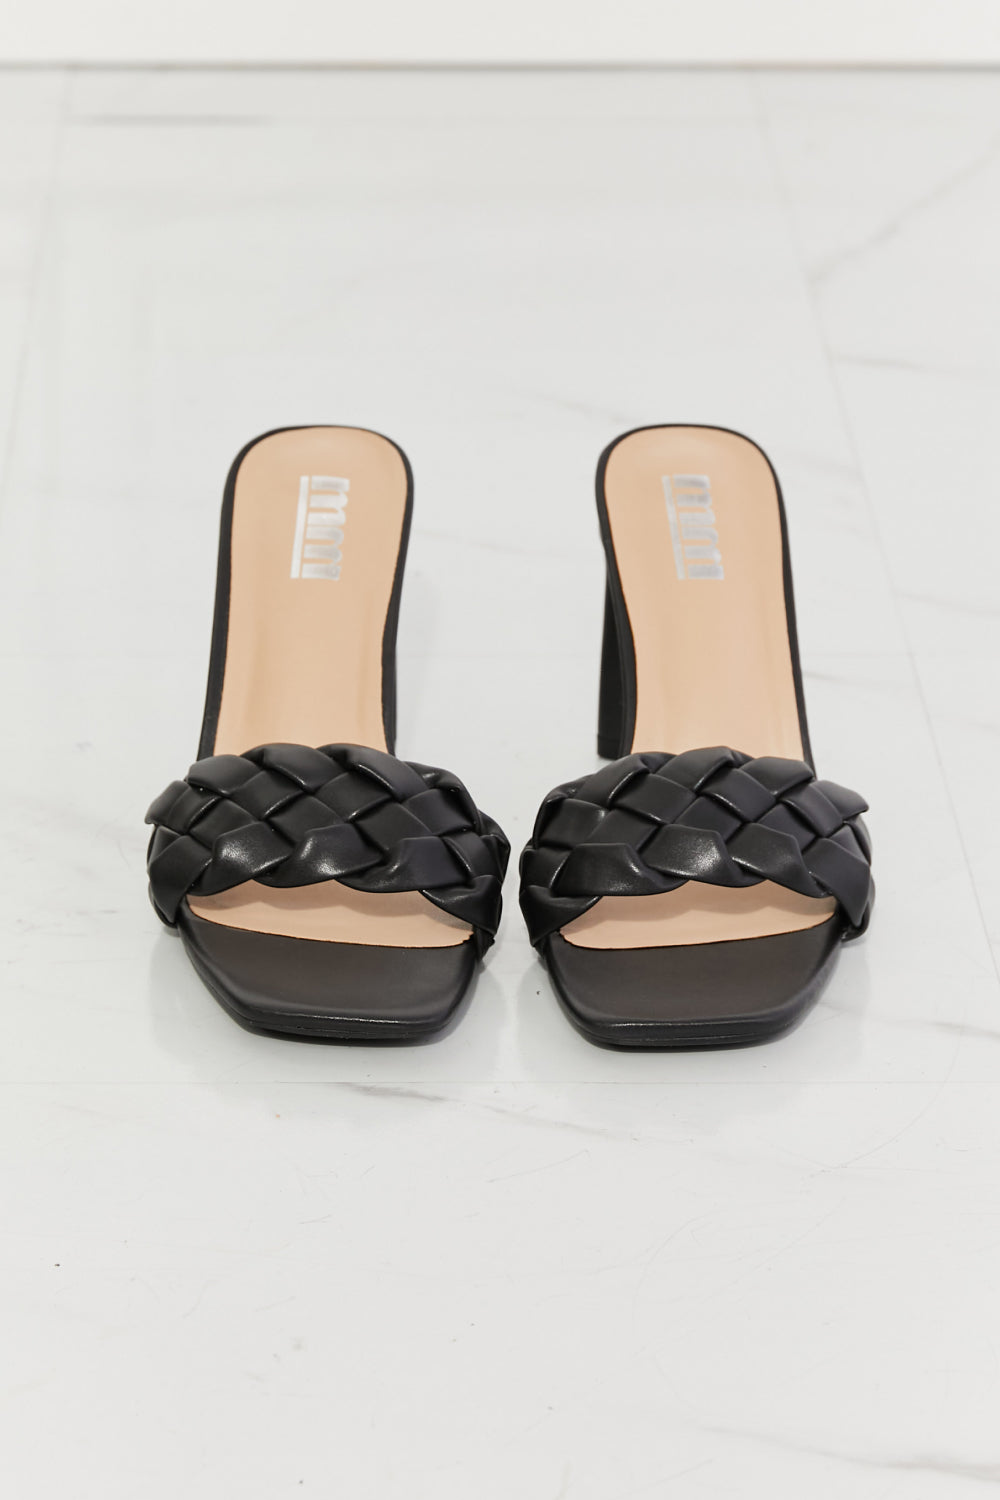 MMShoes Top of the World Braided Block Heel Sandals in Black Print on any thing USA/STOD clothes